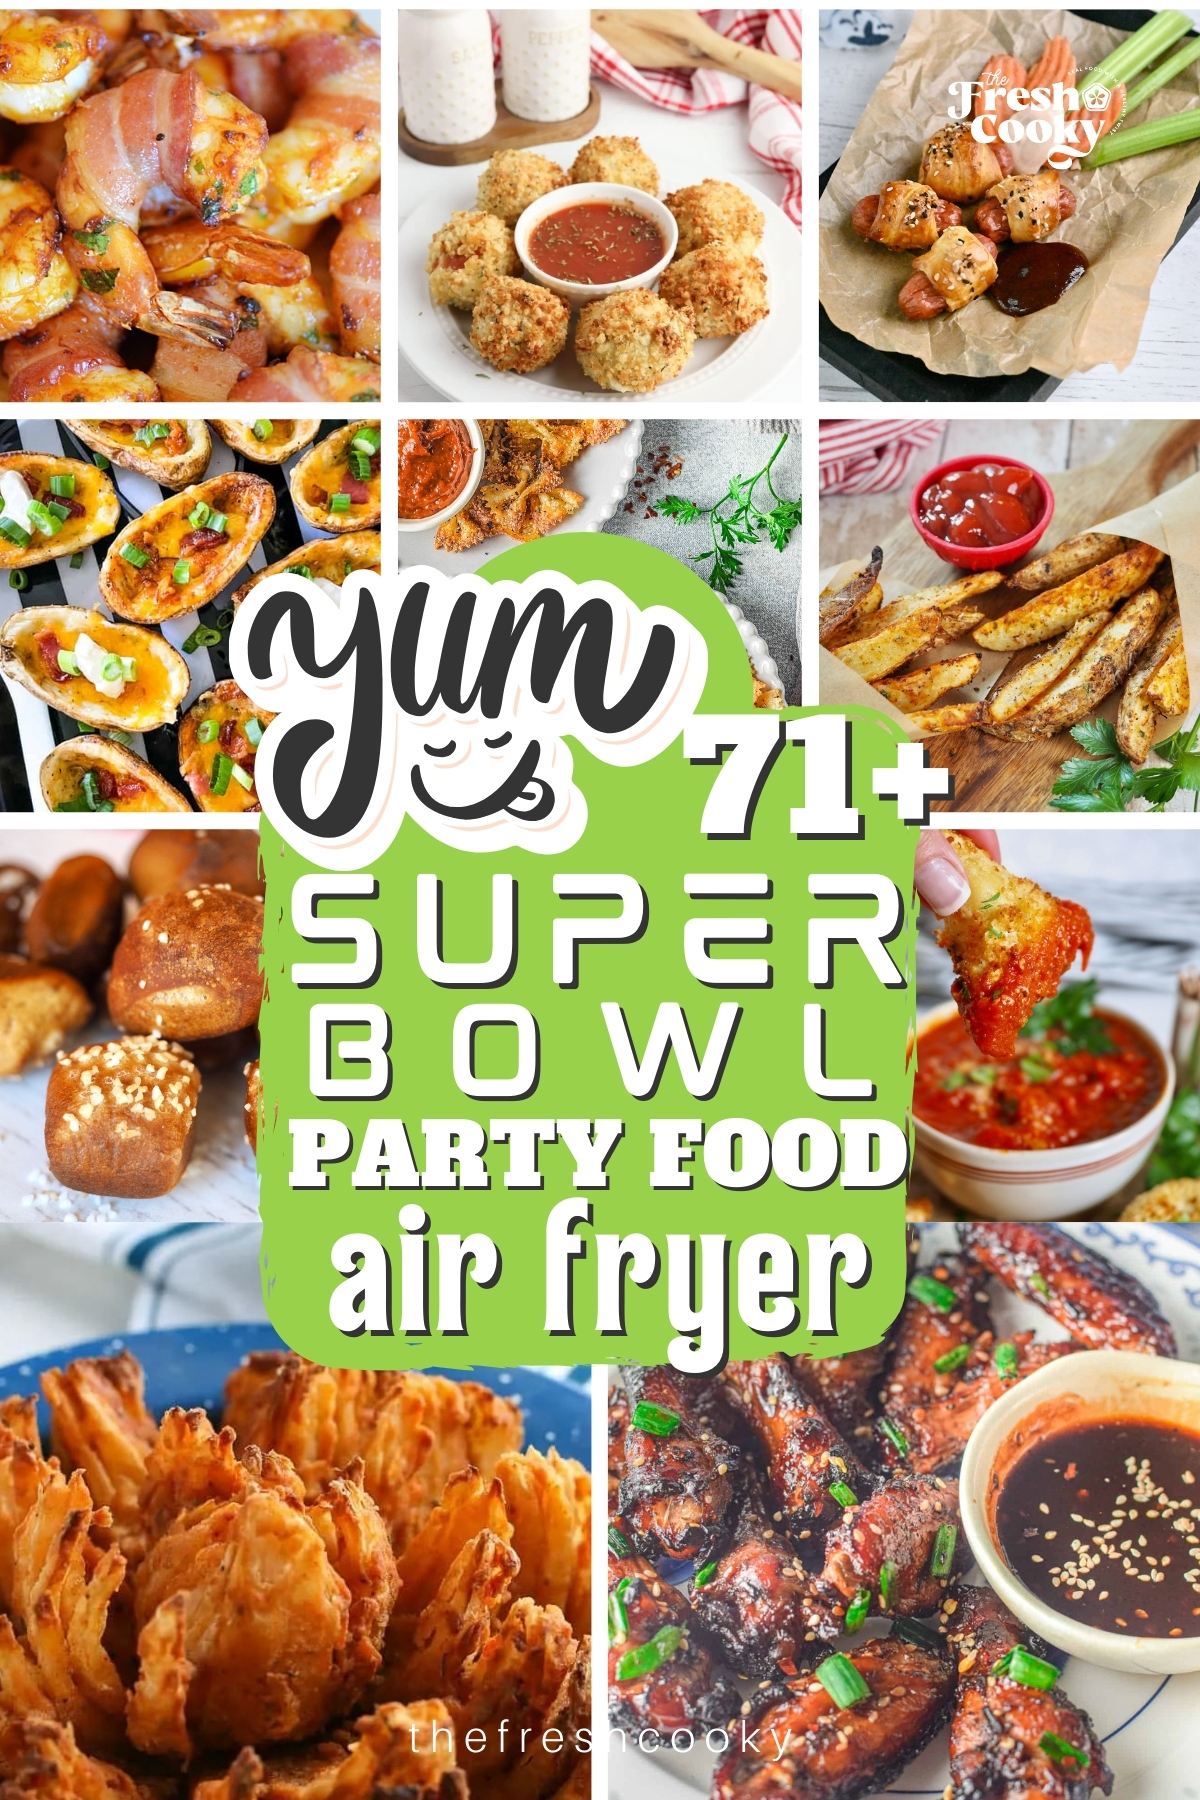 Pin with an assortment of super bowl party food ideas all made in the air fryer.